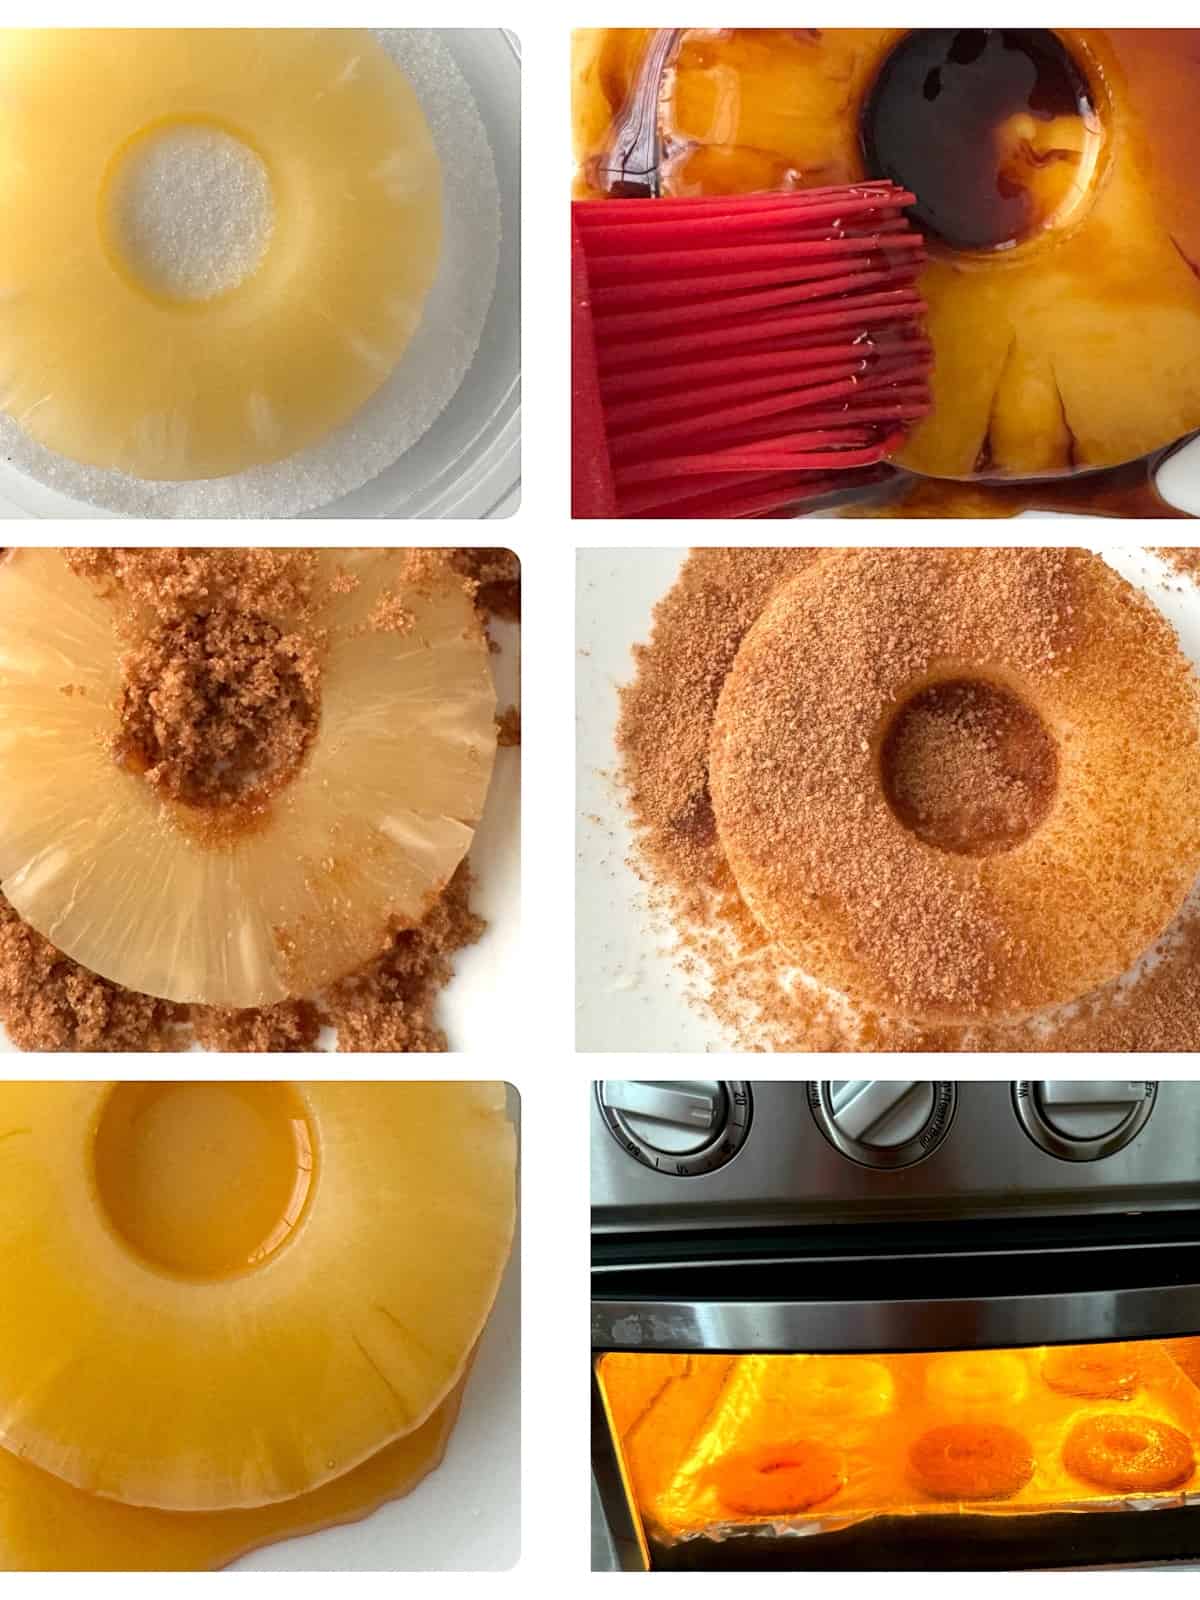 various pineapple slices coated in sugars or syrups.